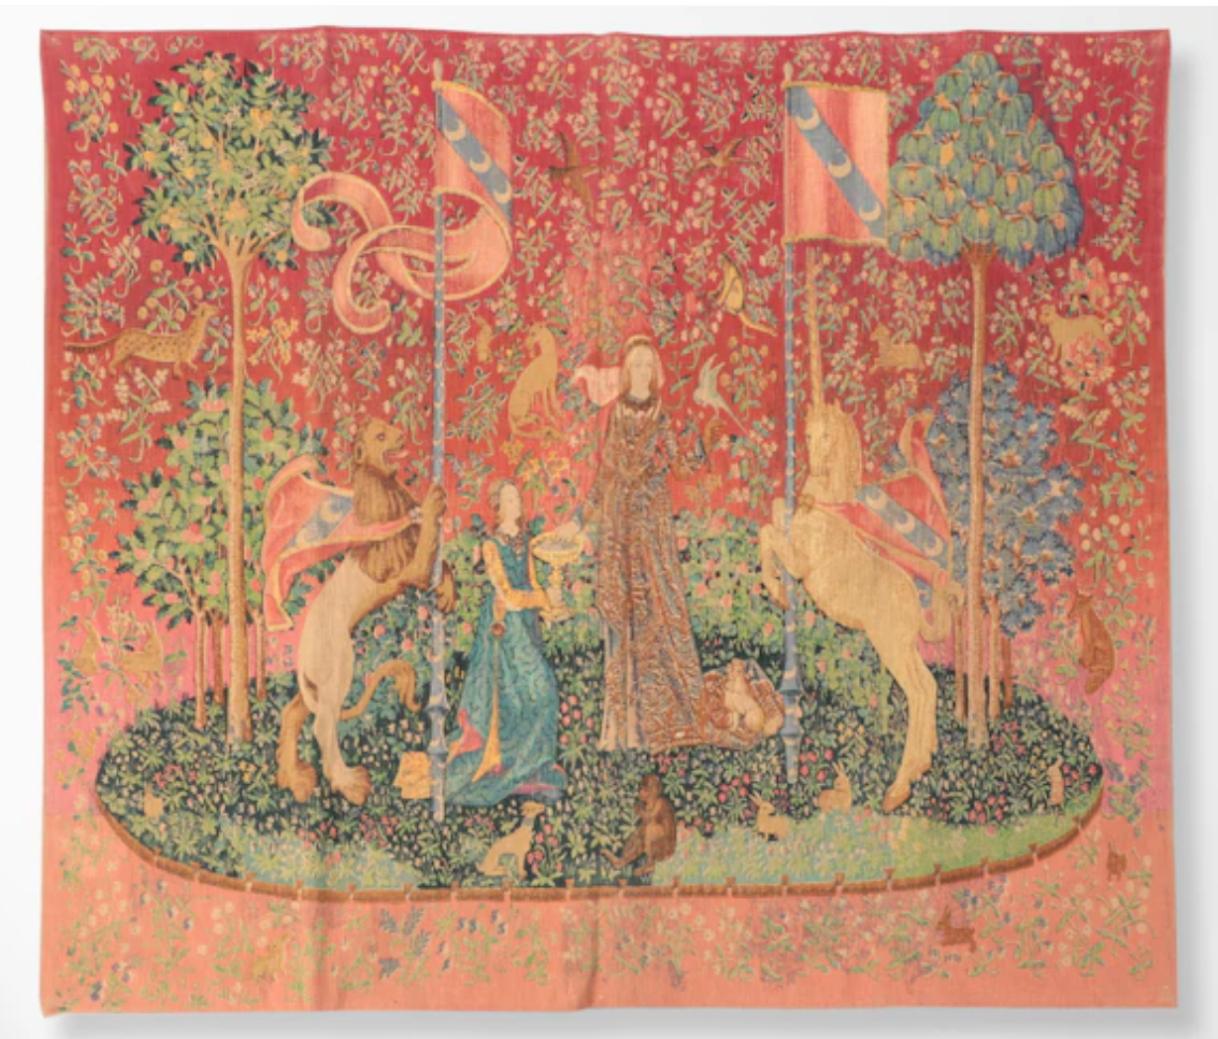 This tapestry is a hand made reproduction after an original 16th century tapestry titled La Dame à la licorne by Editions d’Art de Rambouillet of the French company de Rambouillet, referring to the techniques used in the seventeenth century,